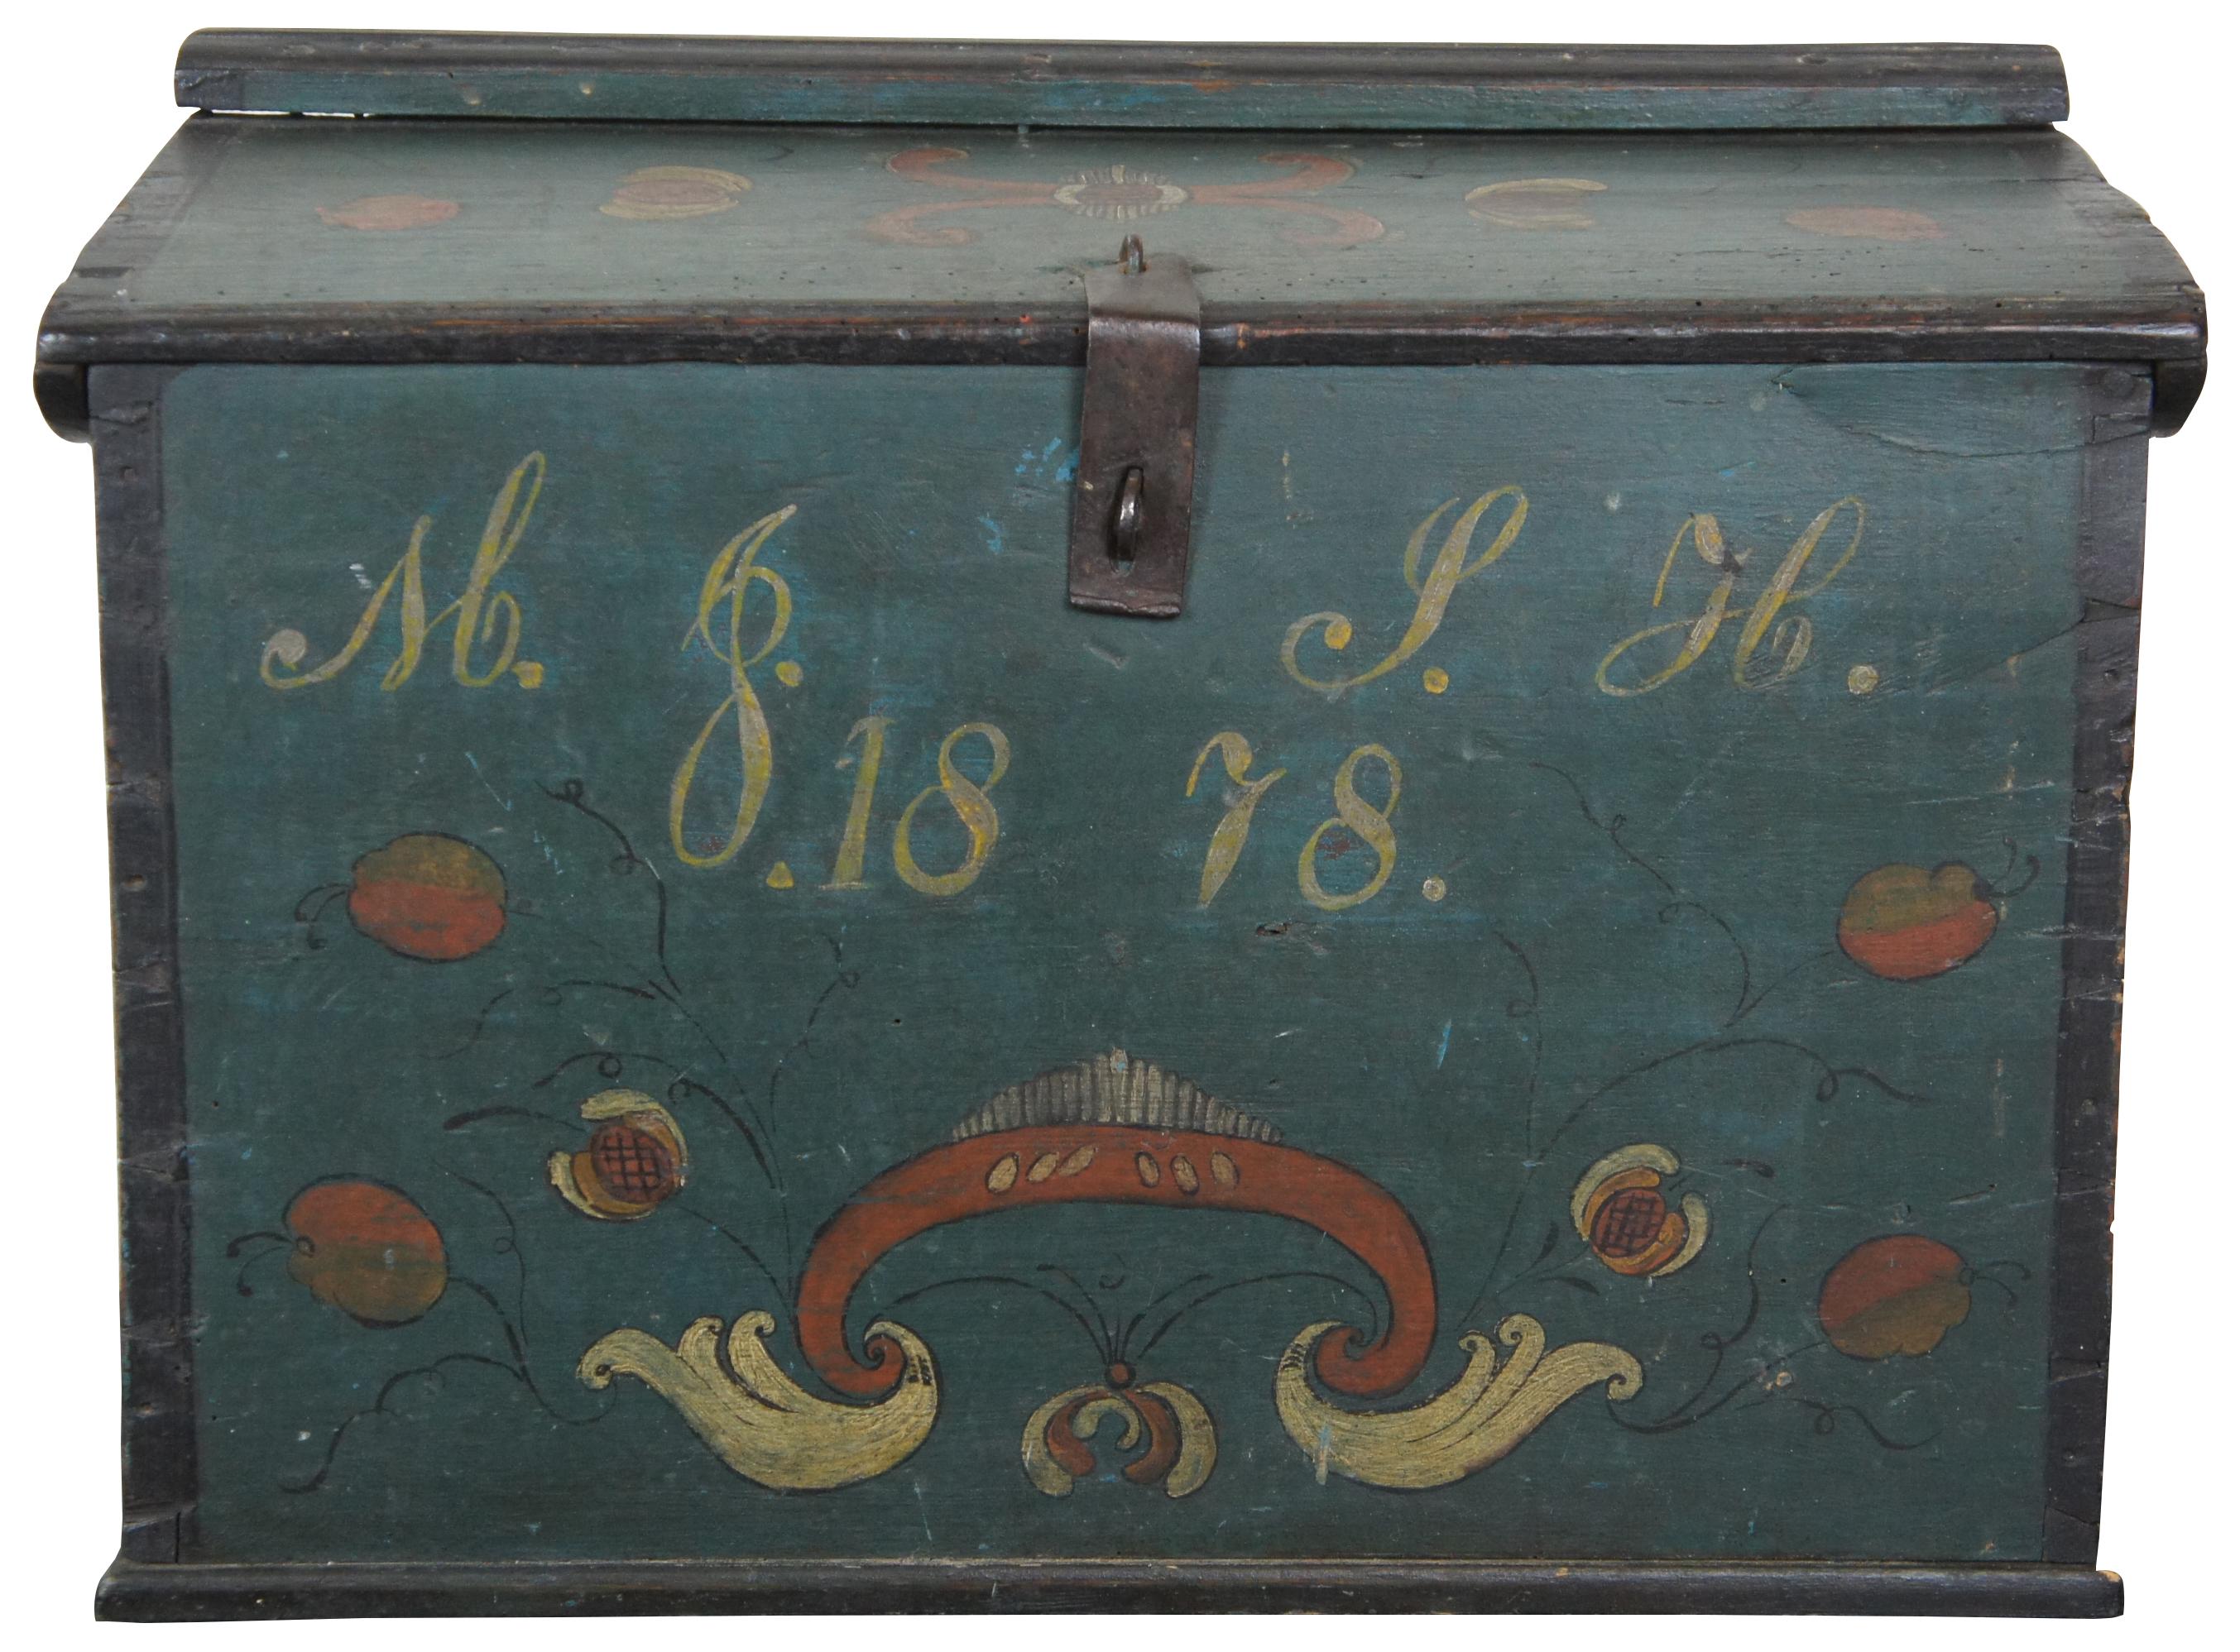 Antique pine box with clasp for a padlock, painted in green and black with folk art style fruit designs and two sets of initials over the date 1878
